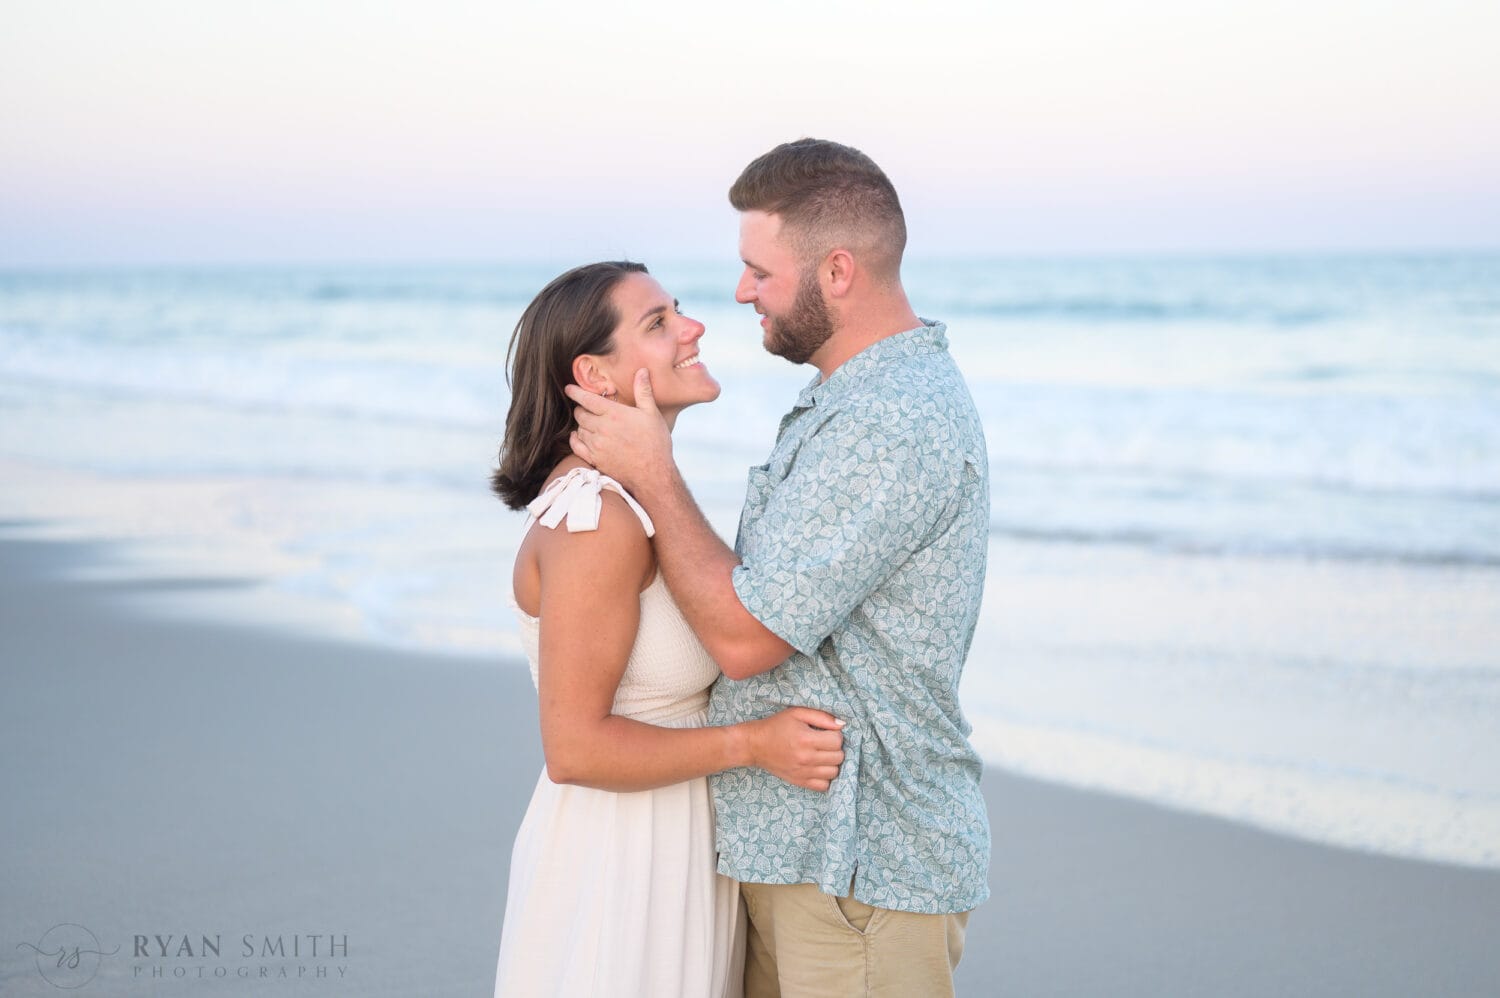 Loving looks by the ocean at sunset - Huntington Beach State Park - Myrtle Beach